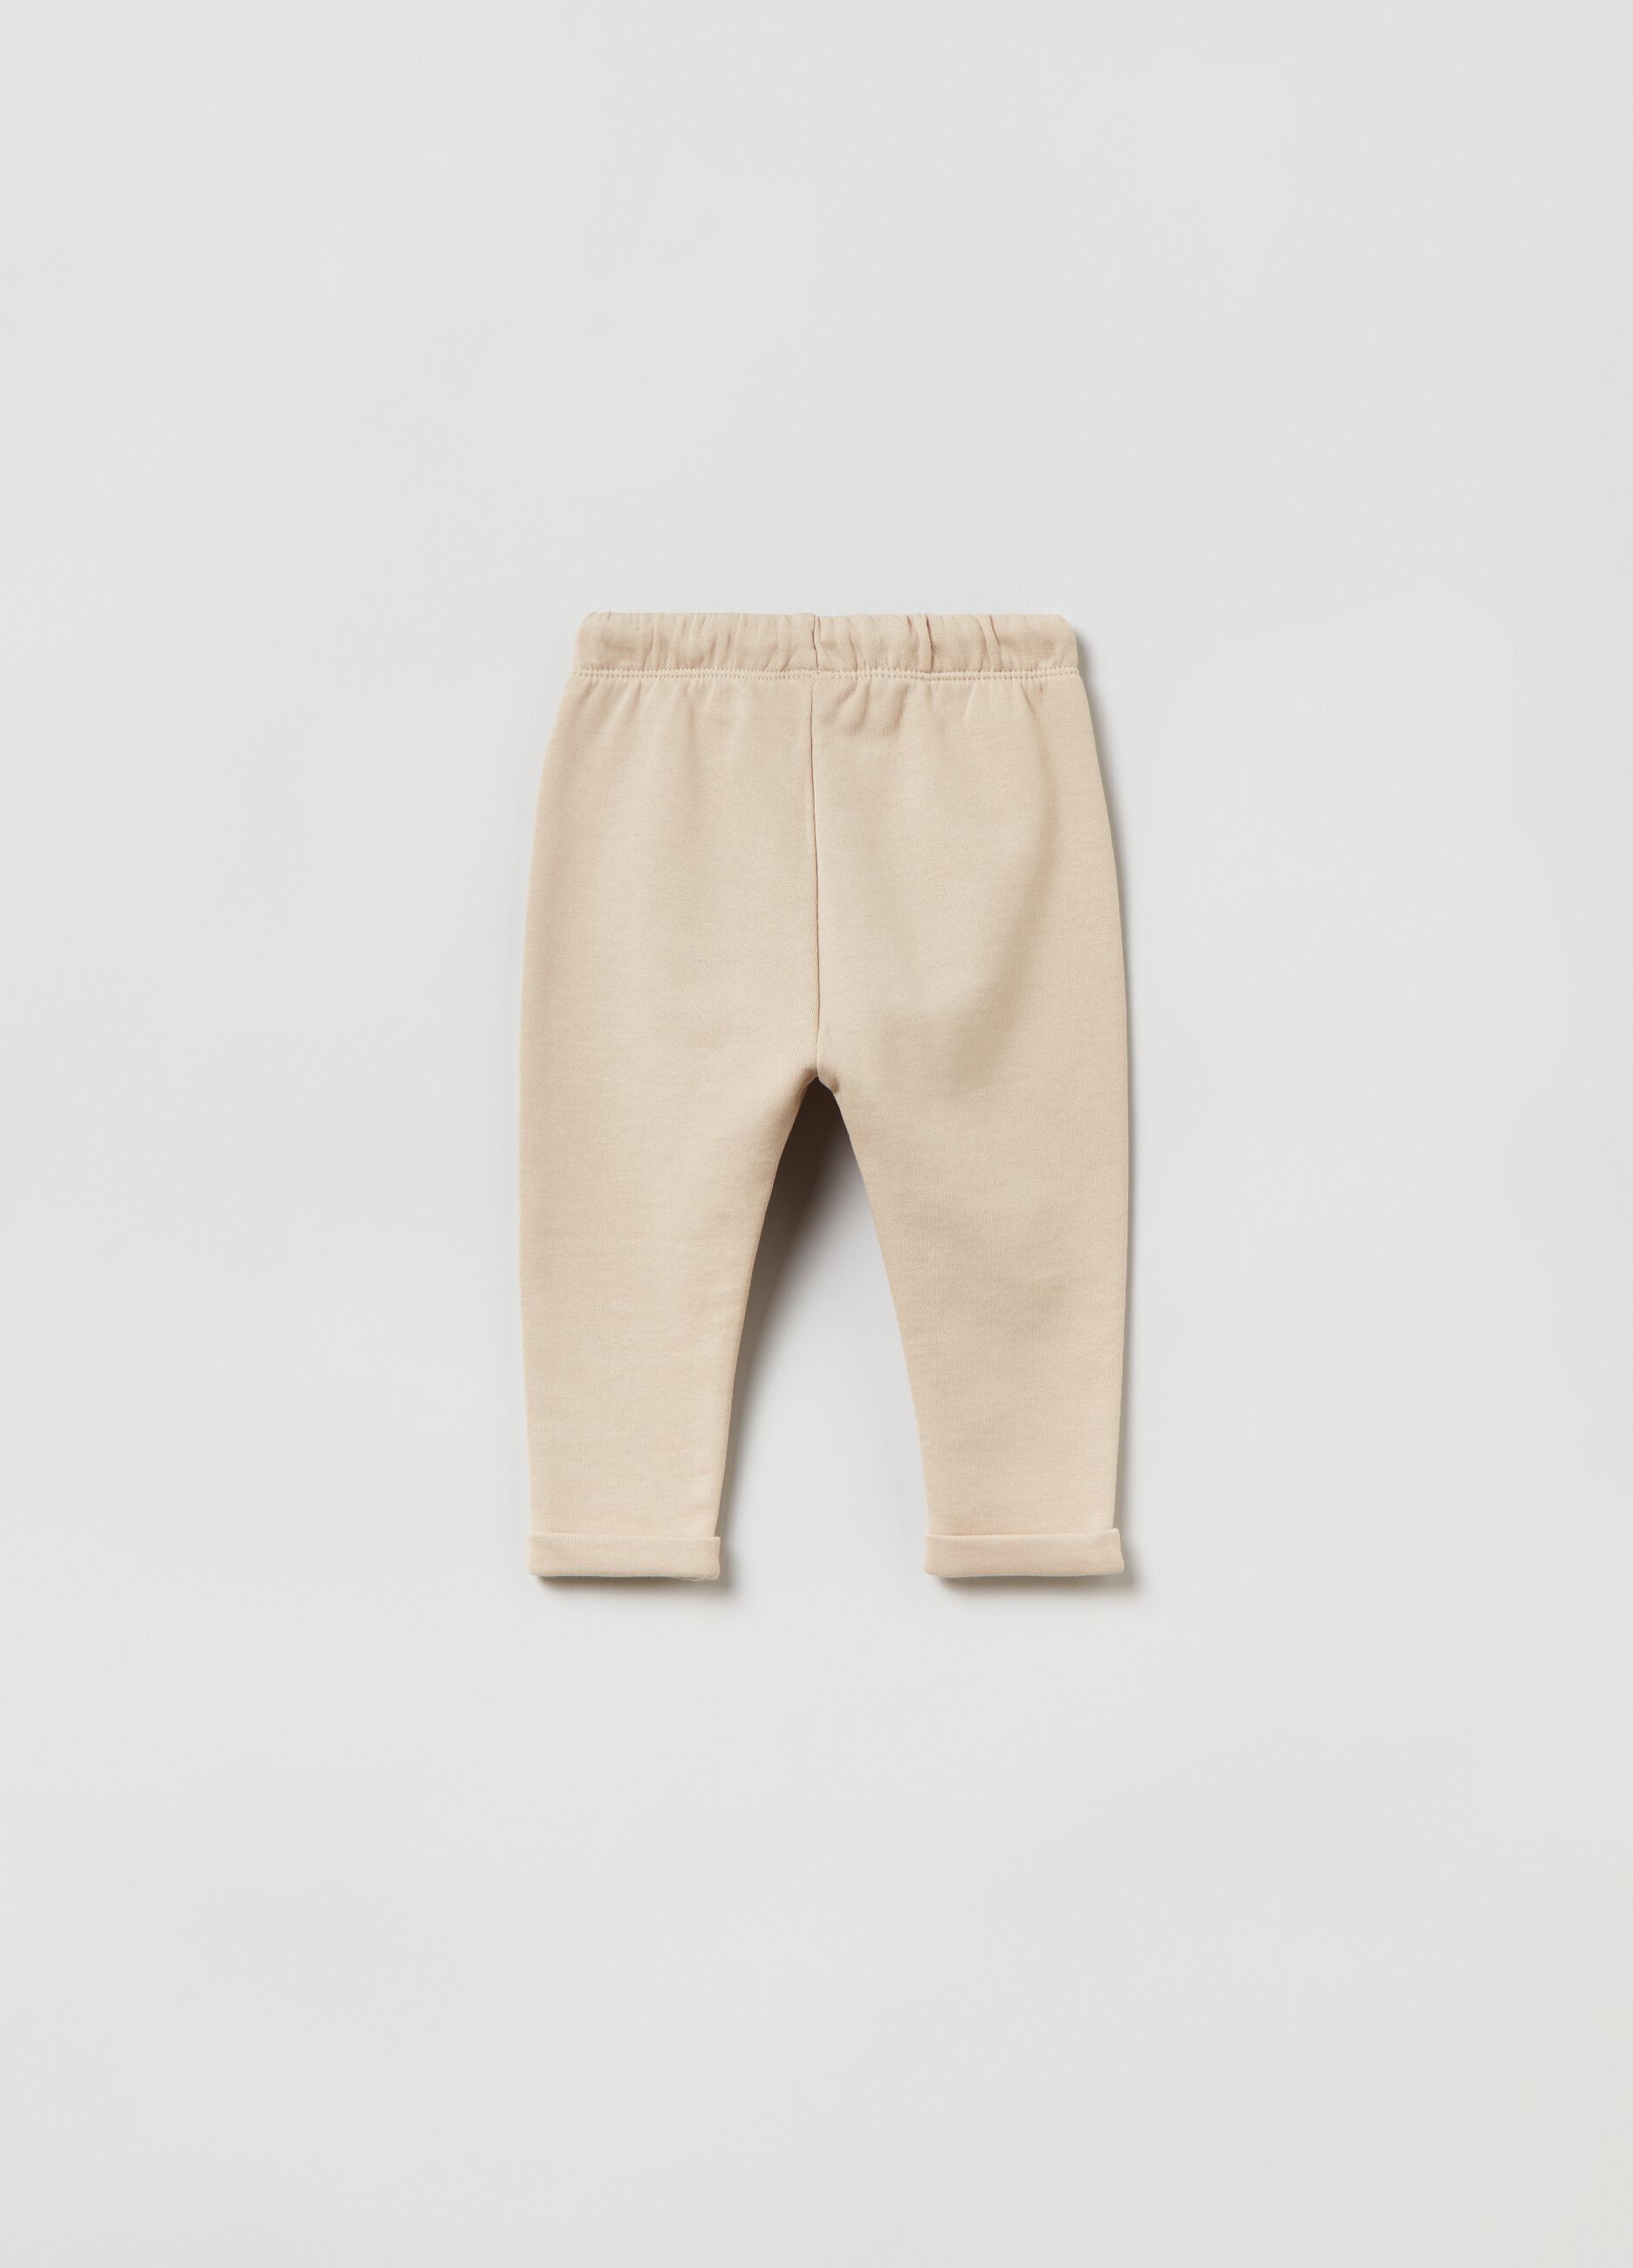 Cotton joggers with pouch pocket